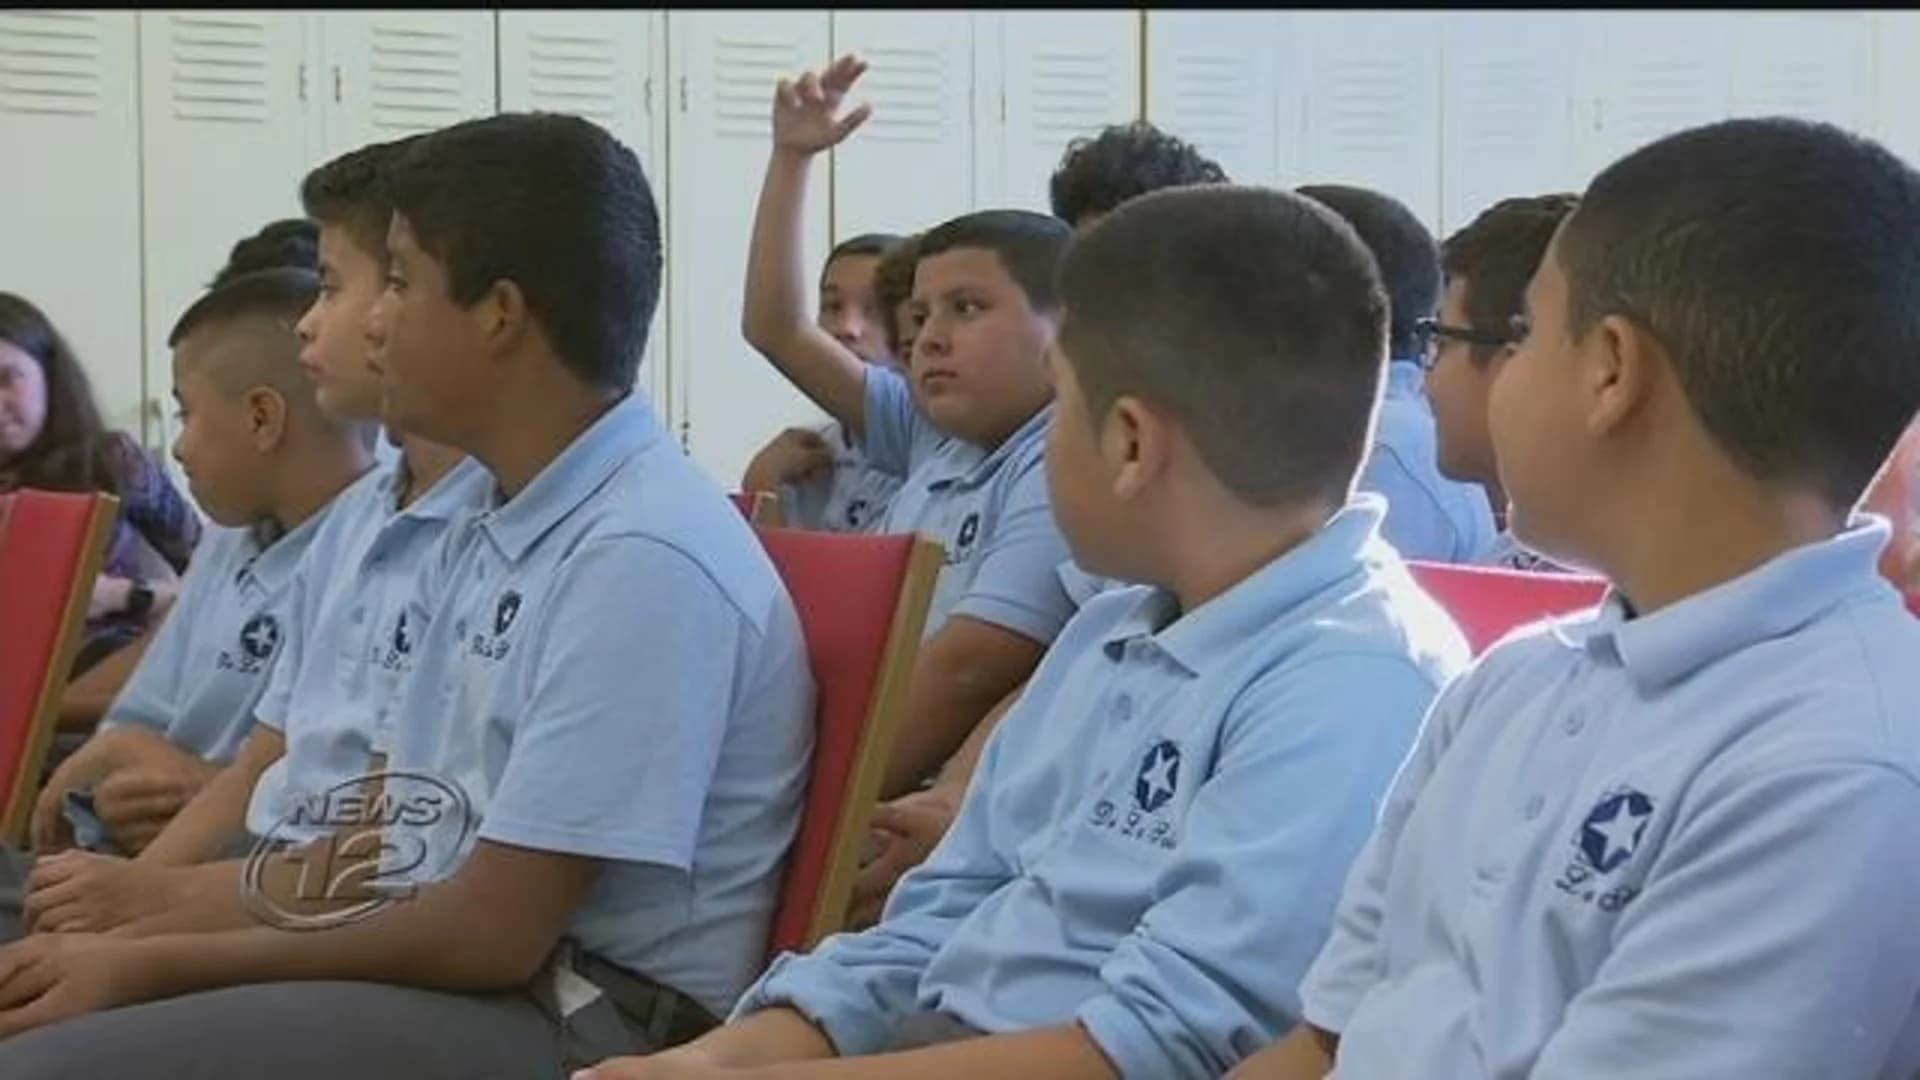 Freeport school gives underprivileged boys opportunities to succeed